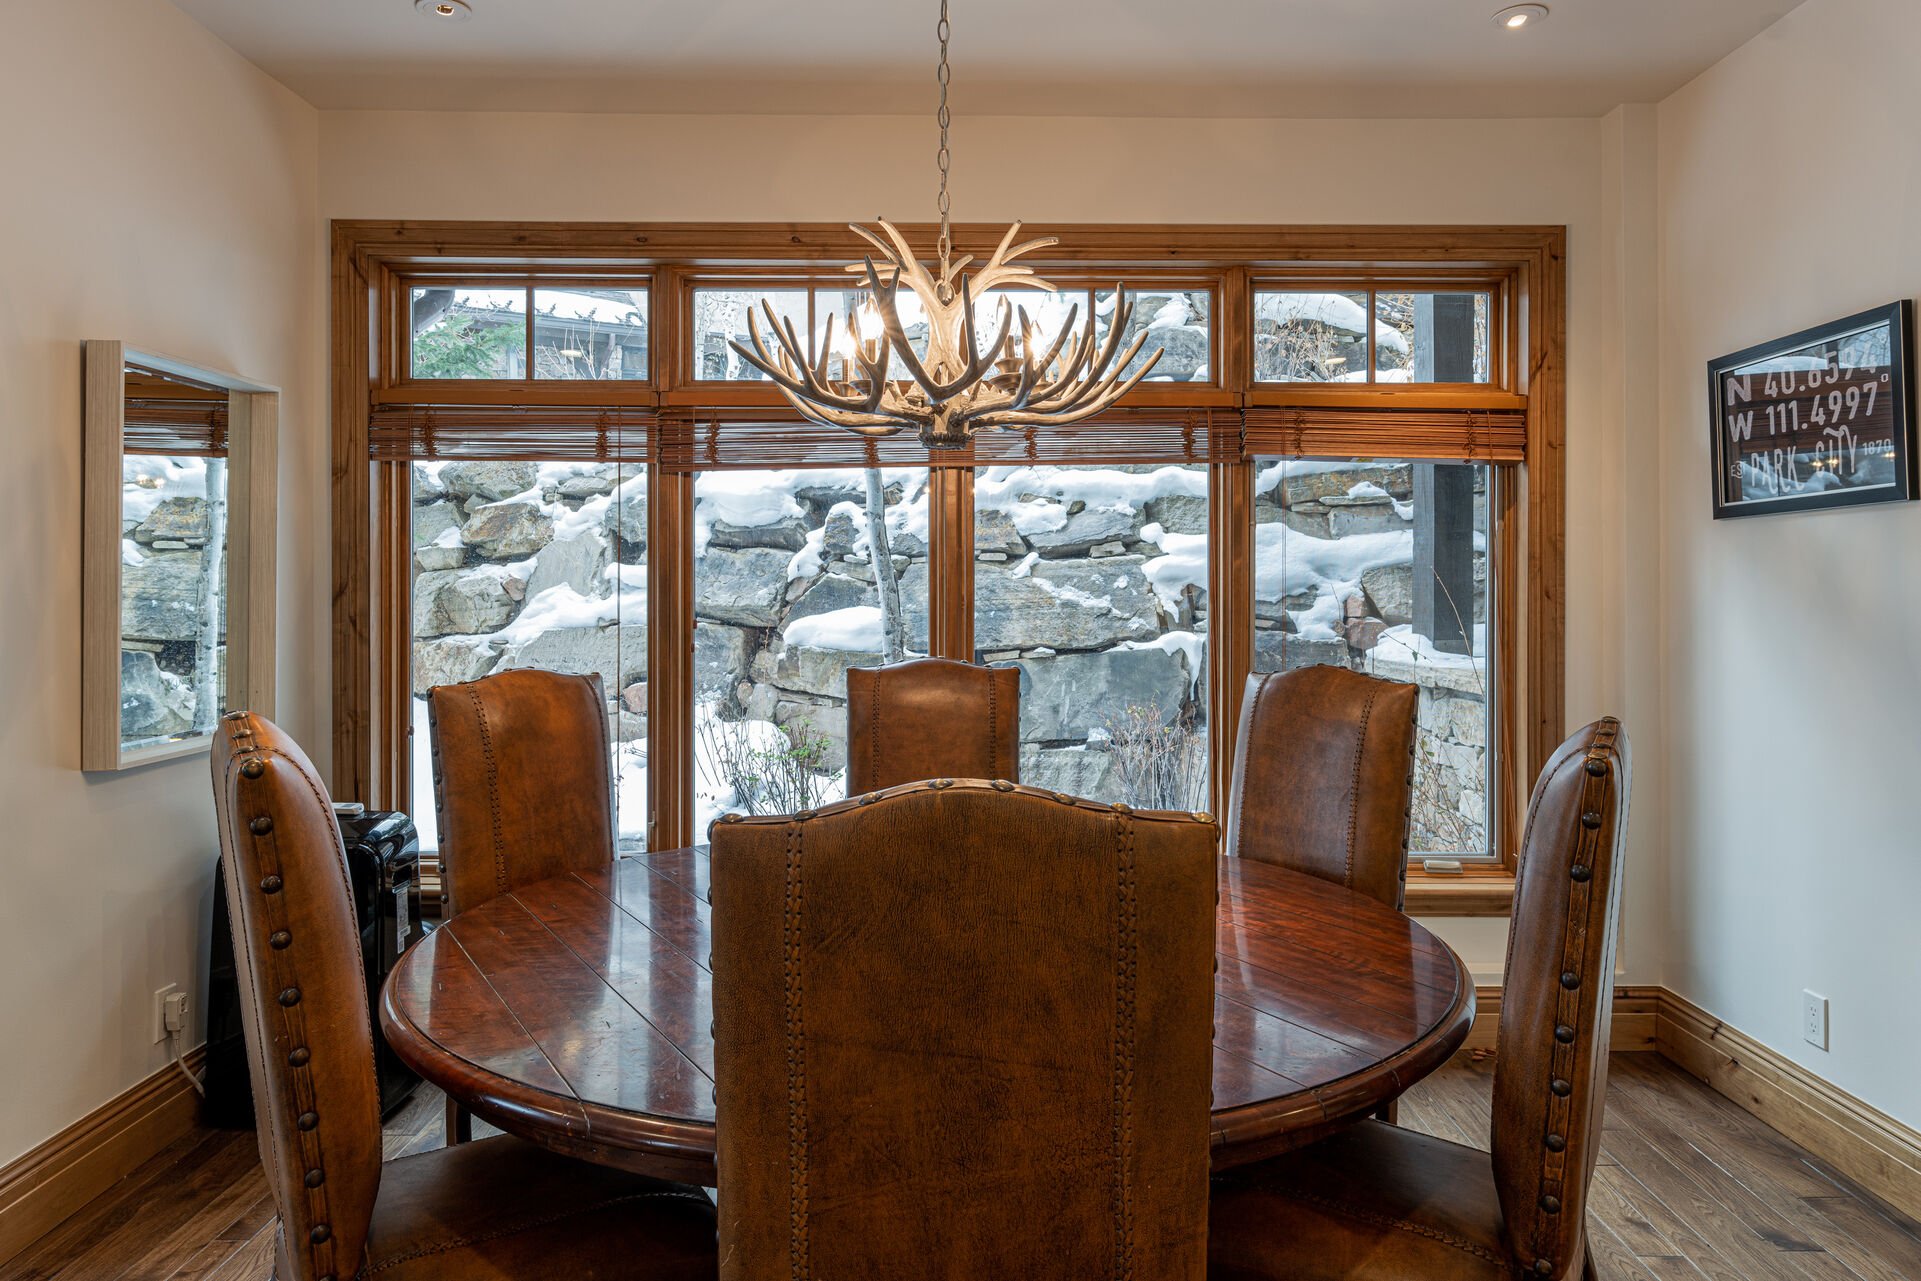 Dining area offers a table with seating for six